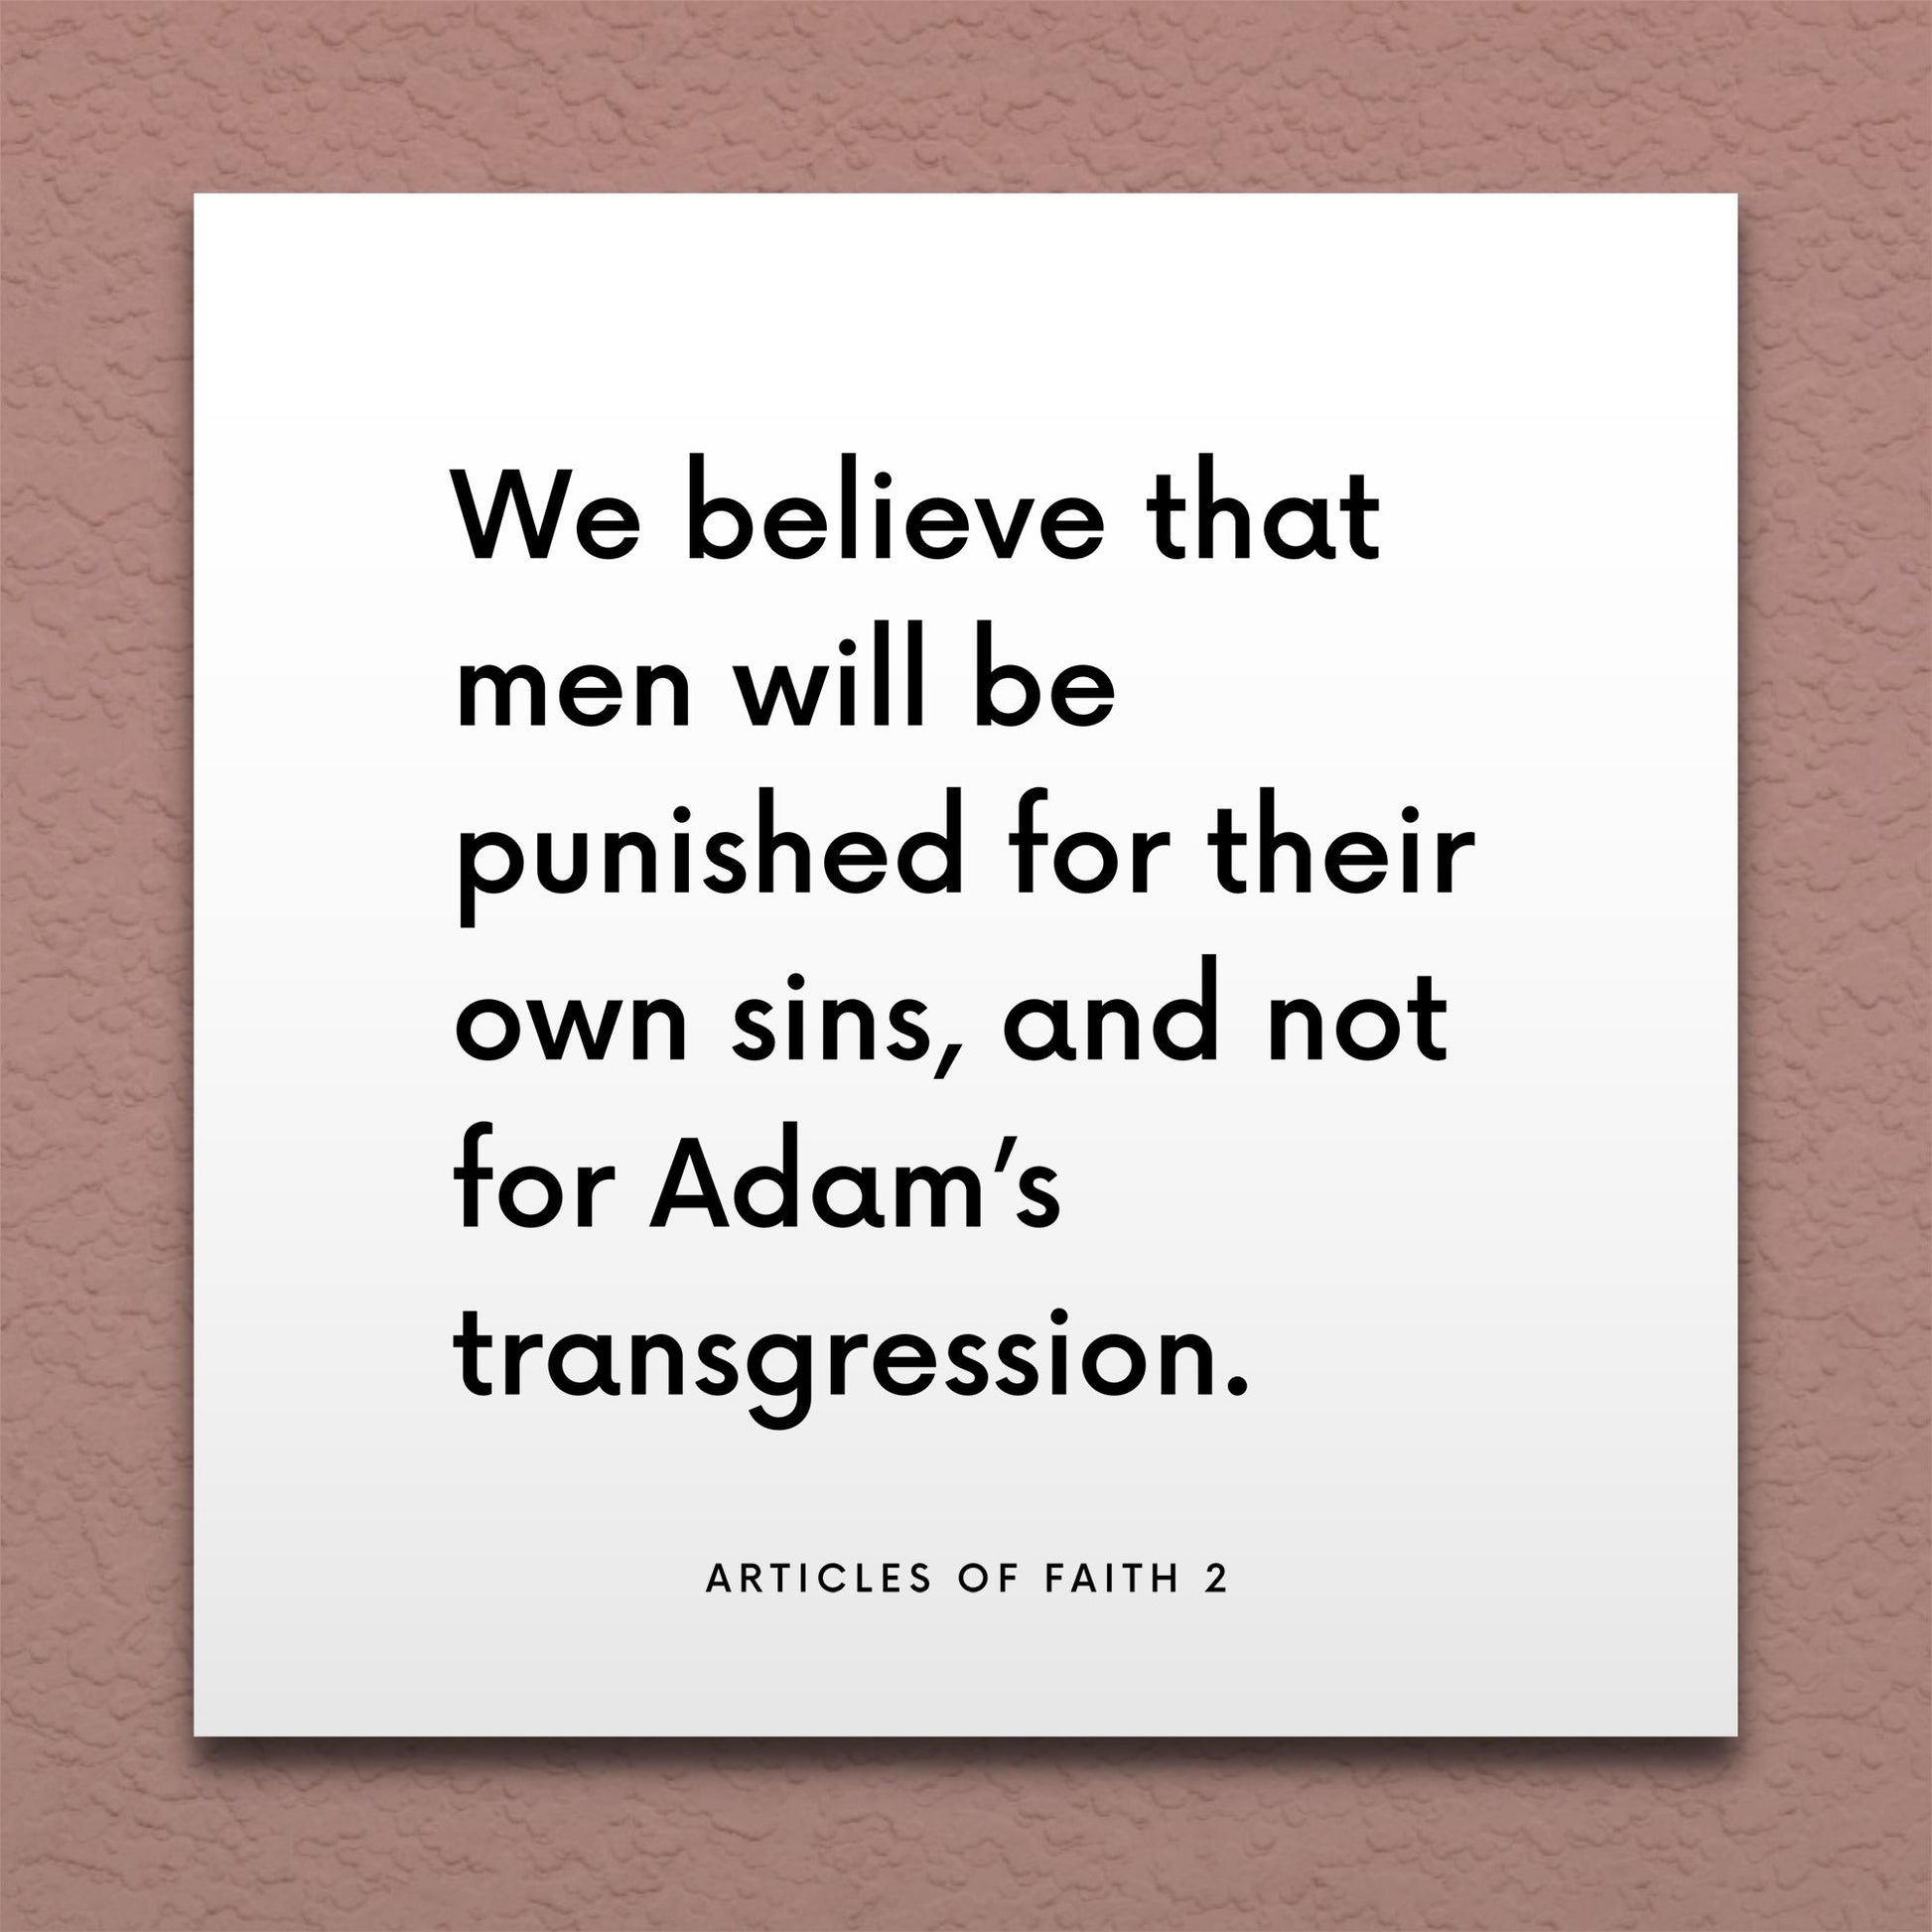 Wall-mounted scripture tile for Articles of Faith 2 - "We believe that men will be punished for their own sins"